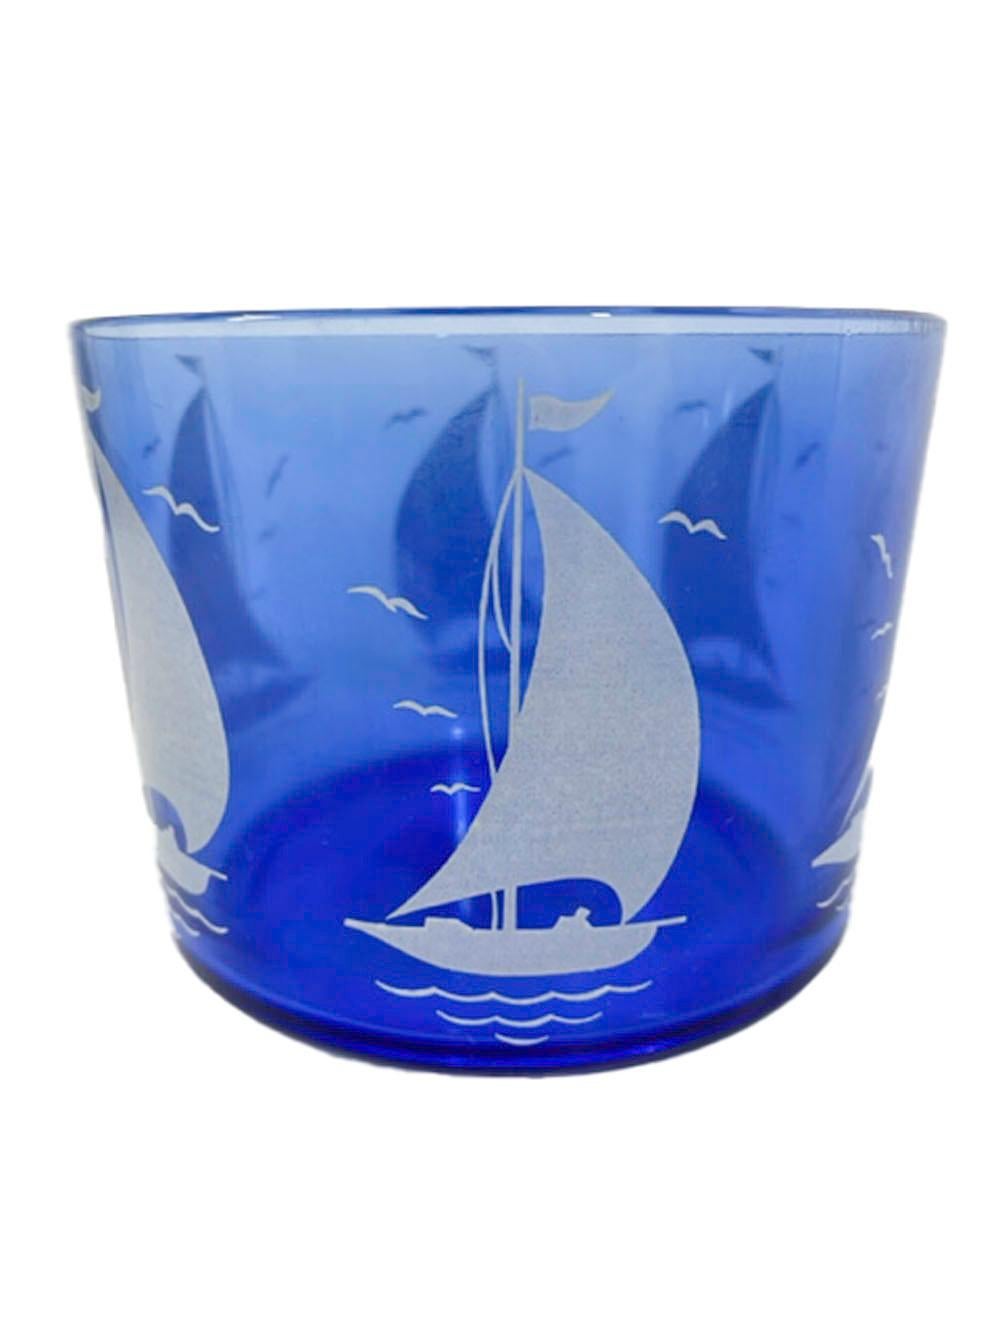 Art Deco cobalt blue glass ice bowl with white sailboats from the Sportsman Series by Hazel-Atlas Glassware.